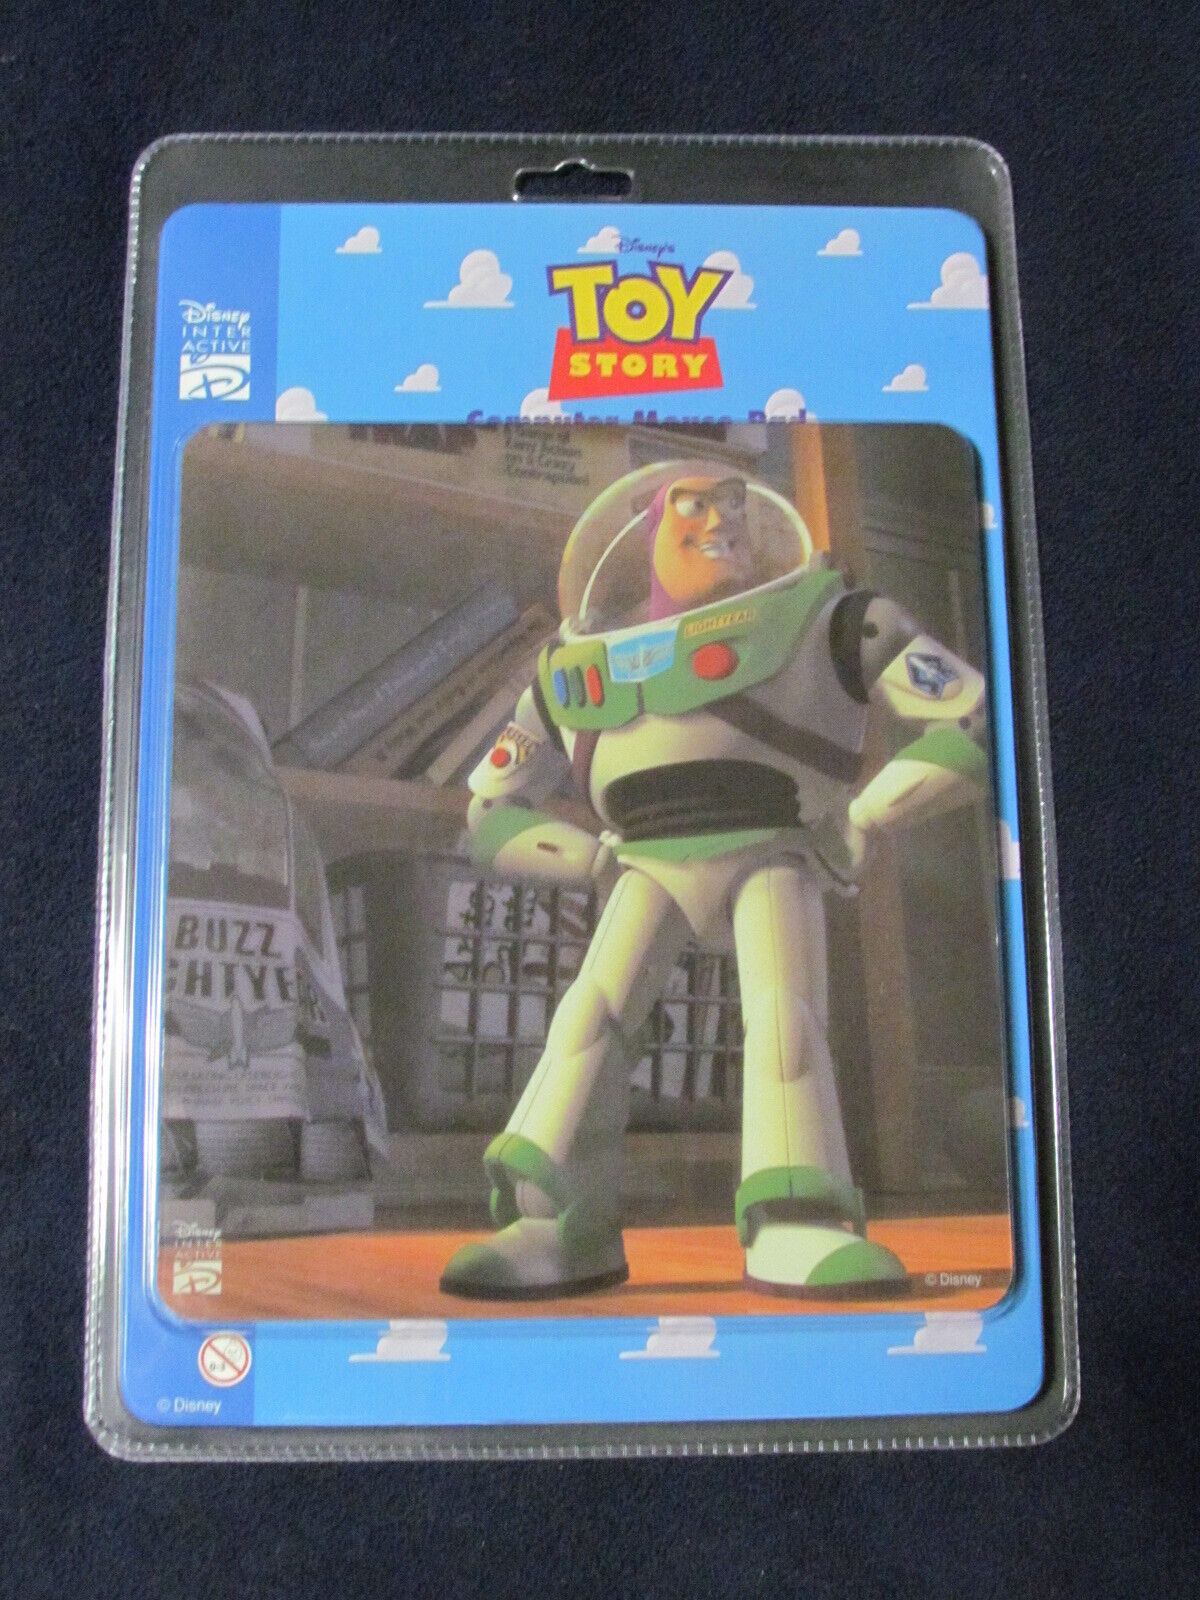 New Toy Story Computer Mouse Pad Disney Interactive Buzz Lightyear 90s VTG NOS